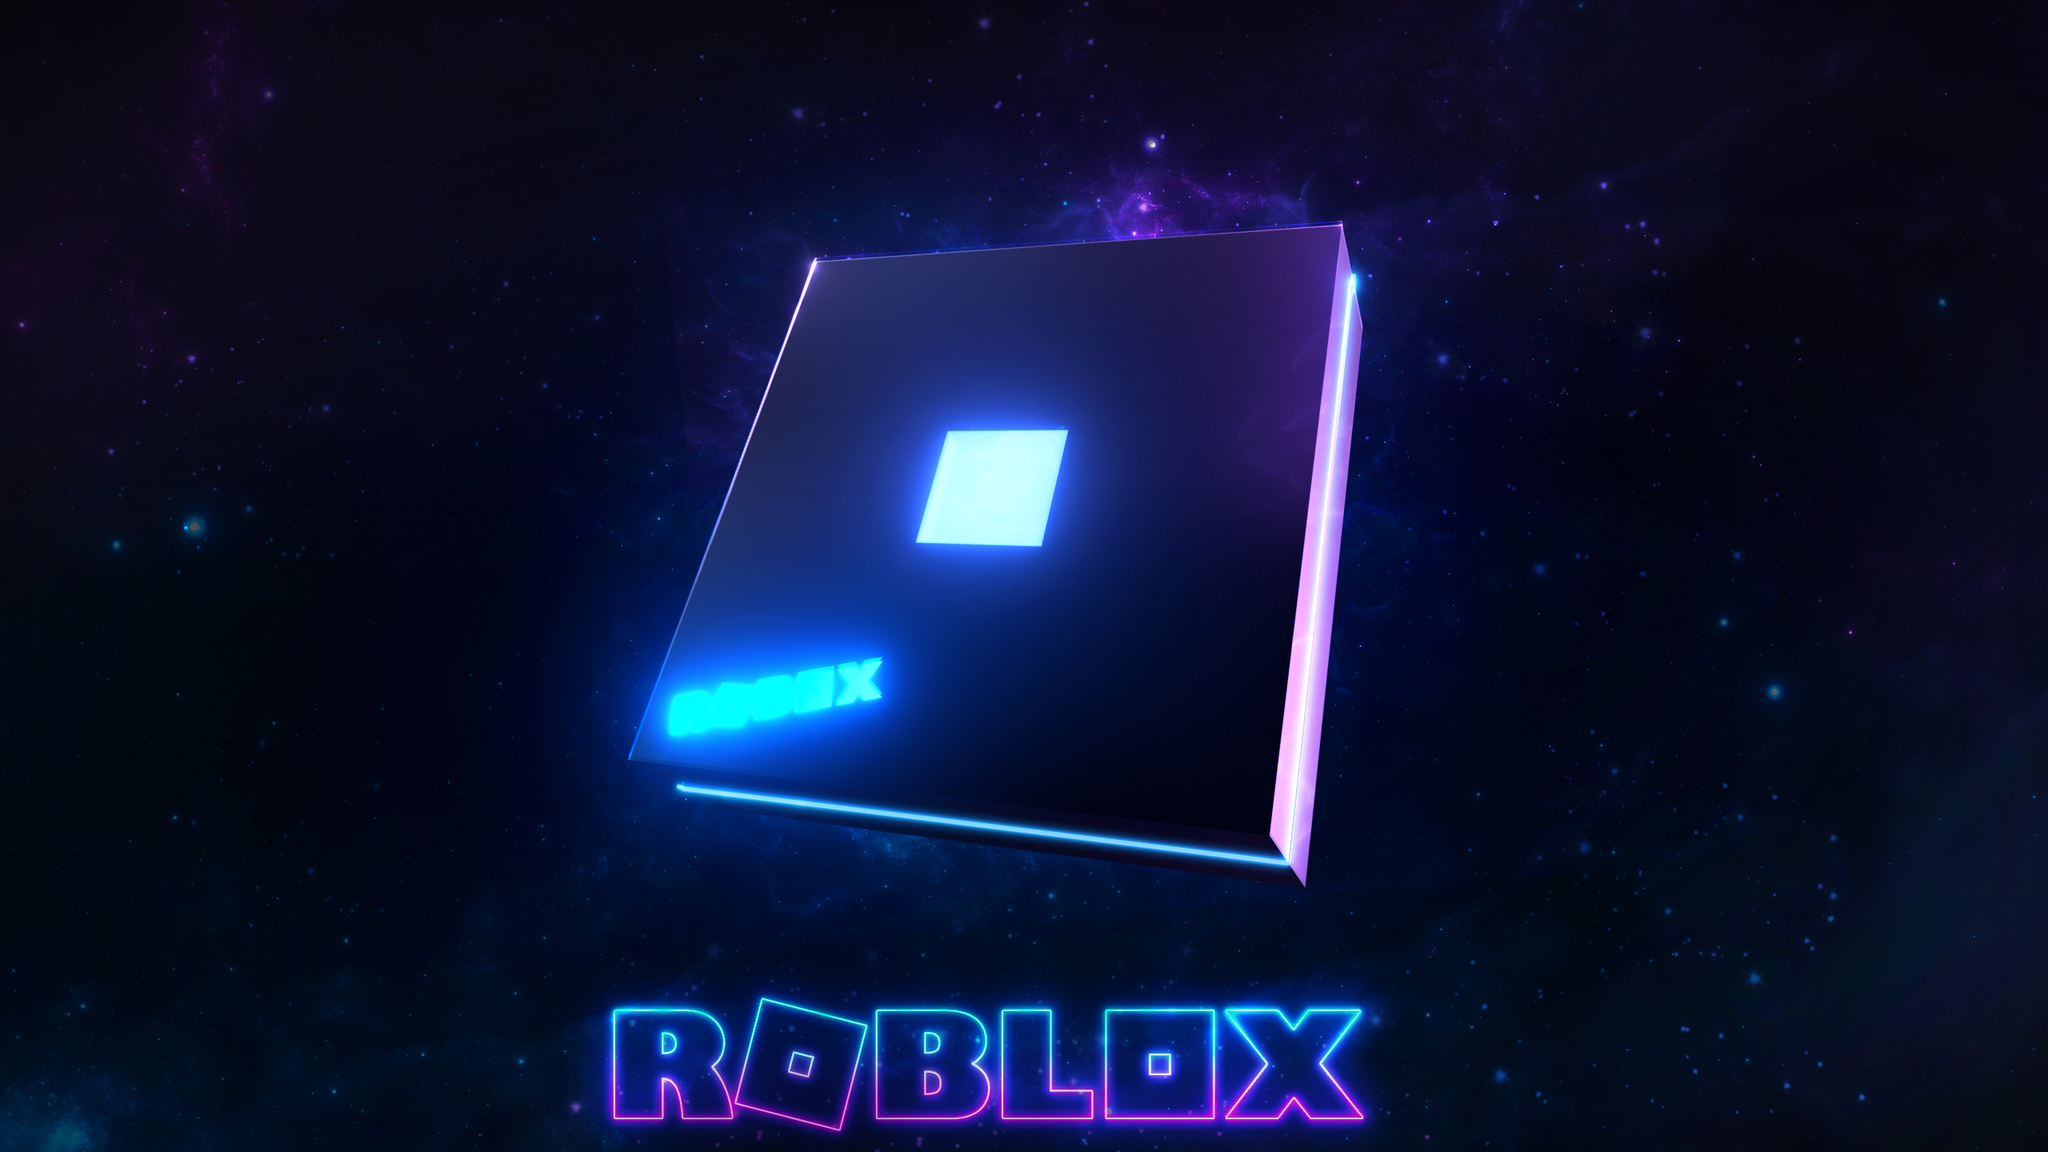 i5K a new ROBLOX wallpaper, let me know what you think!